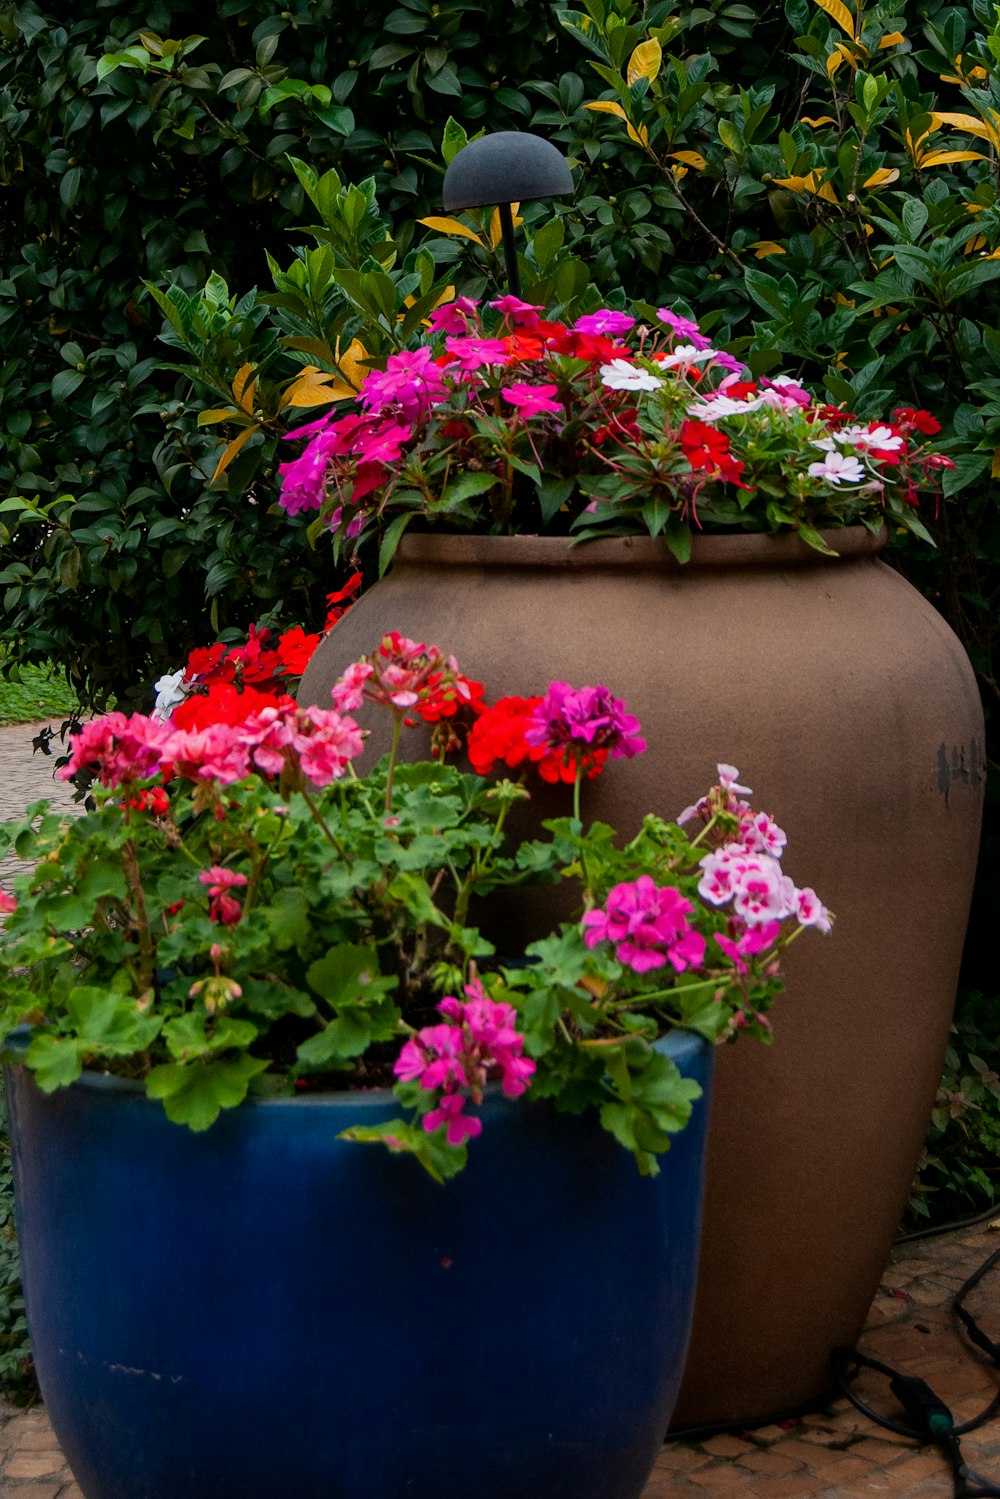 a large potted planter filled with colorful flowers